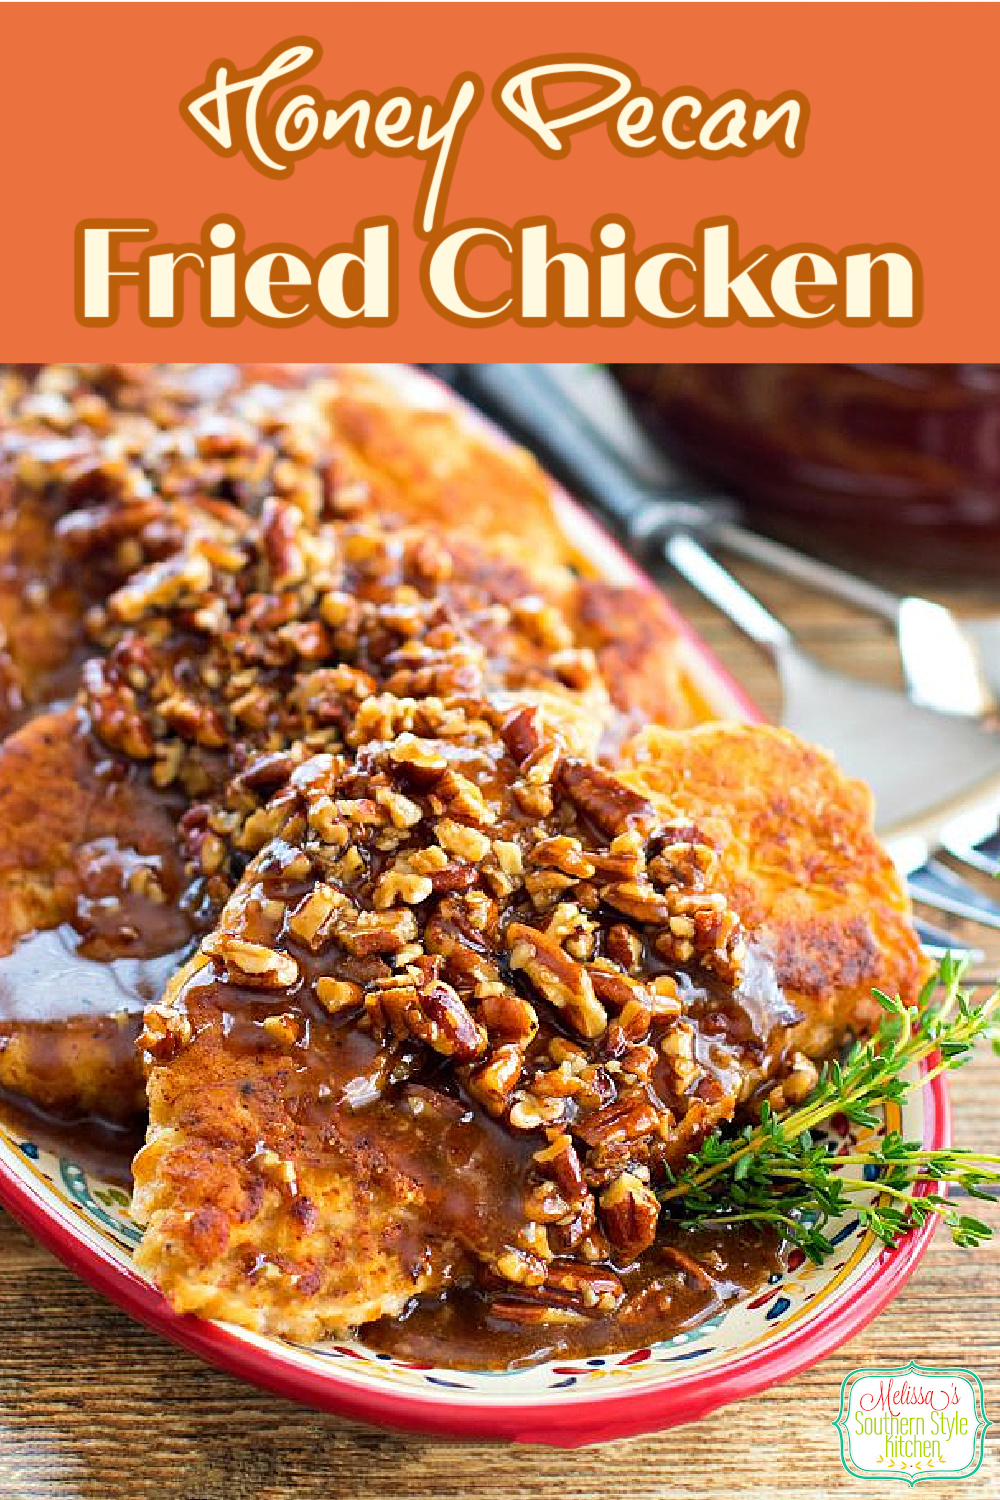 This decadent Honey Pecan Fried Chicken is drizzled with a homemade honey glaze that takes it over the top #easyfriedchicken #honeypecanchicken #easychickenrecipes #Southernfriedchicken #honeypecanglaze #dinner #dinnerideas #chickenbreastrecipes #southernfood #southernrecipes